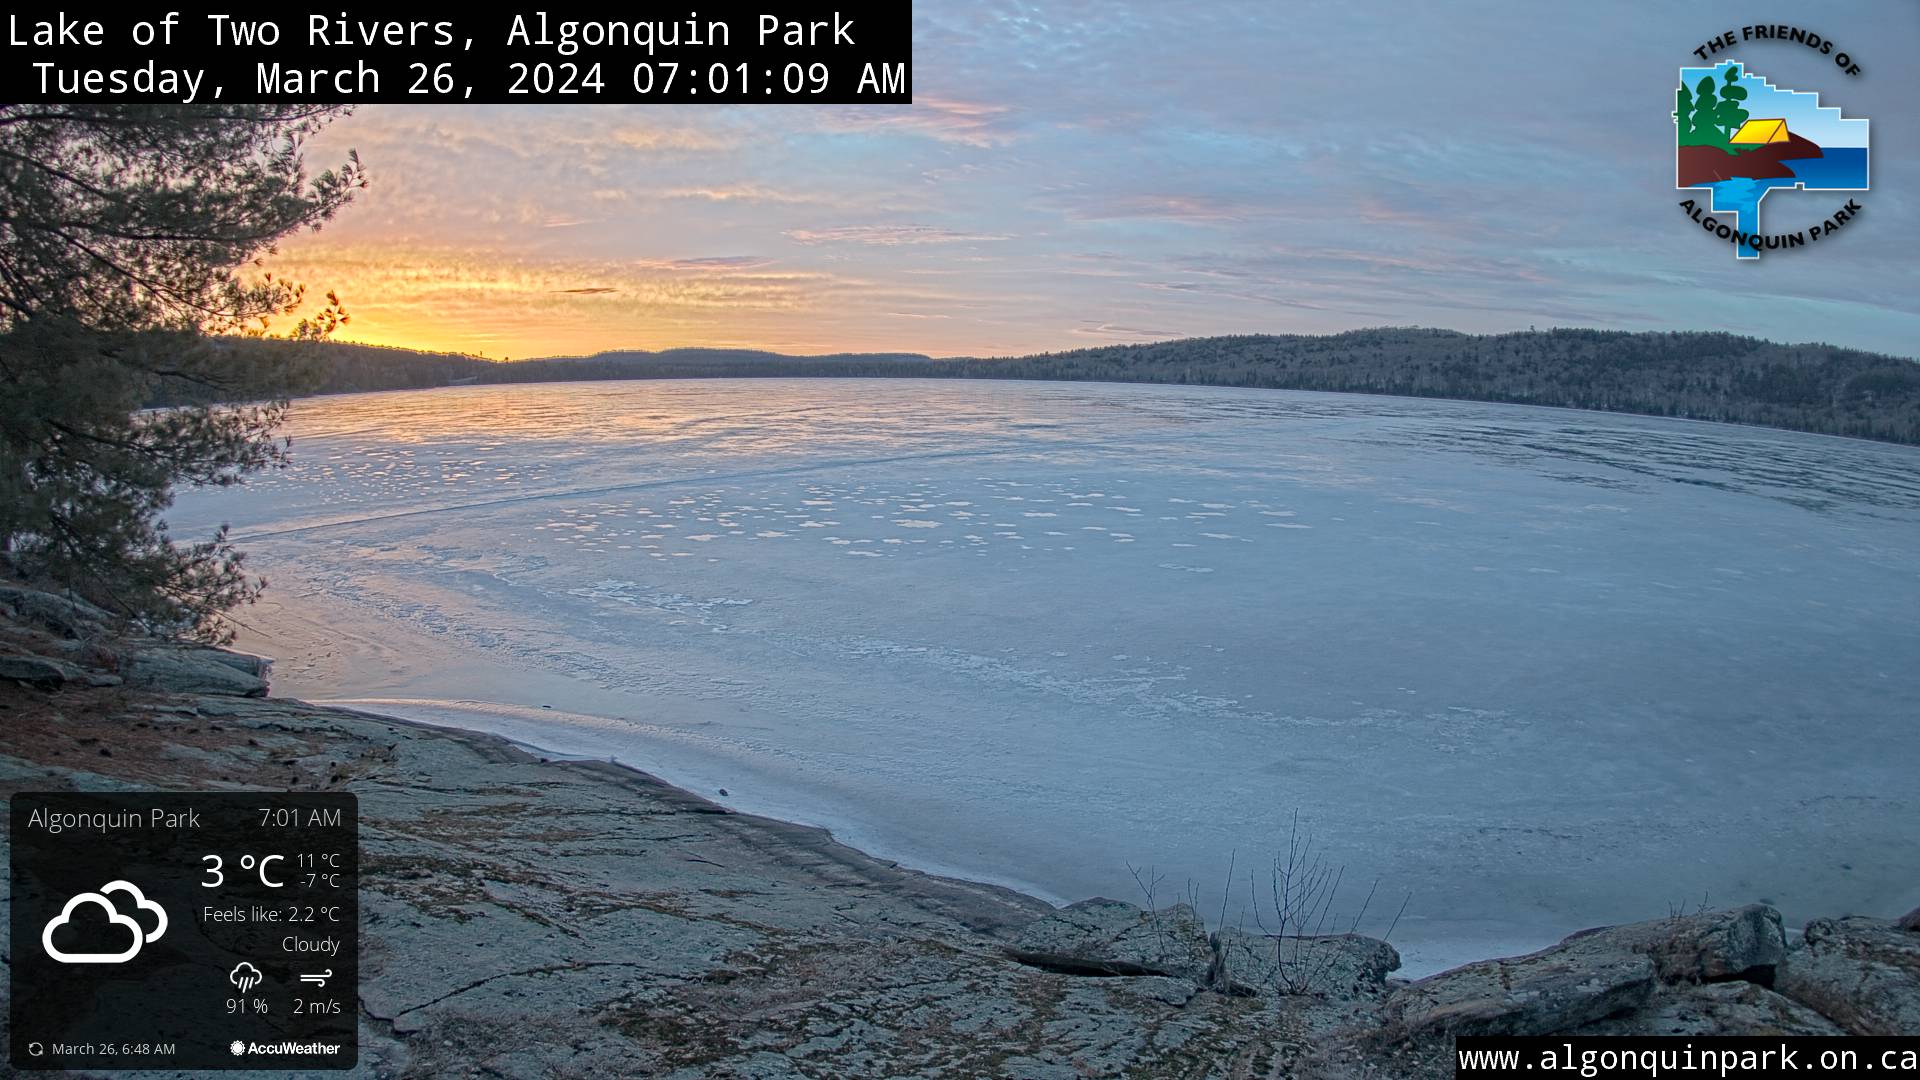 Image: Lake of Two Rivers in Algonquin Park on March 26, 2024 (click to enlarge)